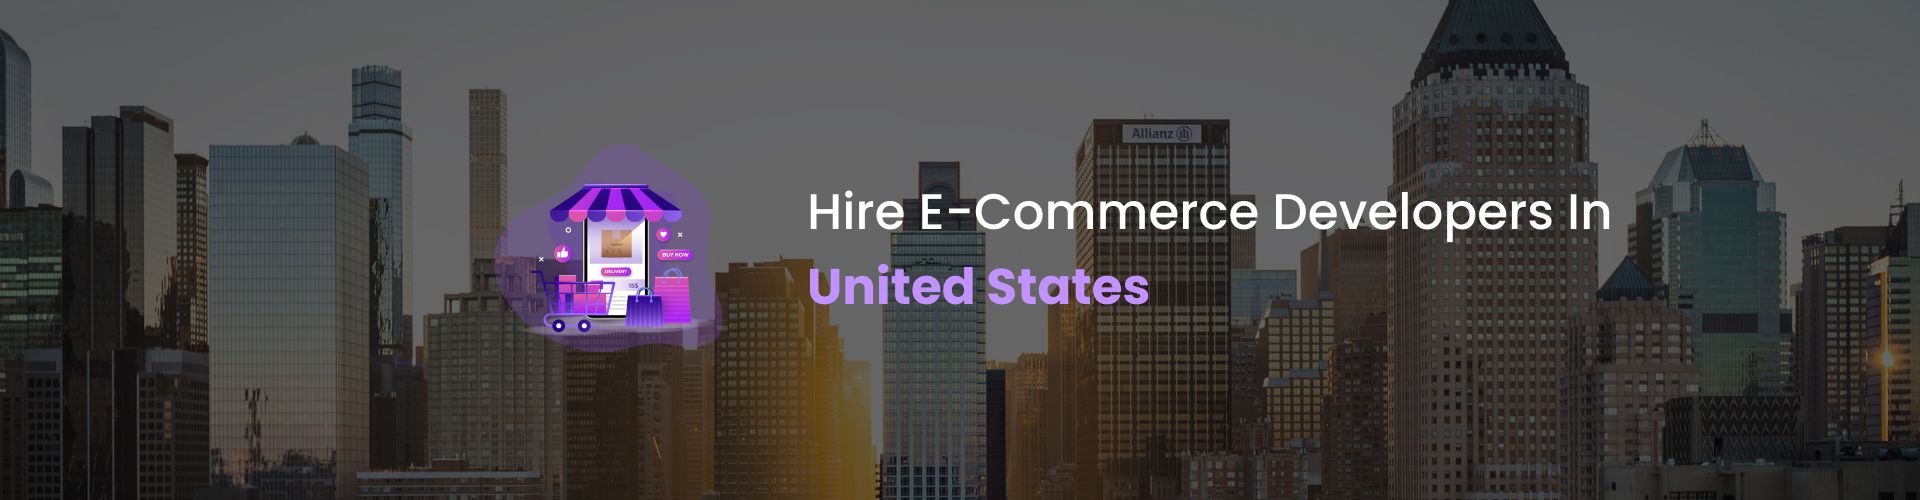 hire ecommerce developers united states